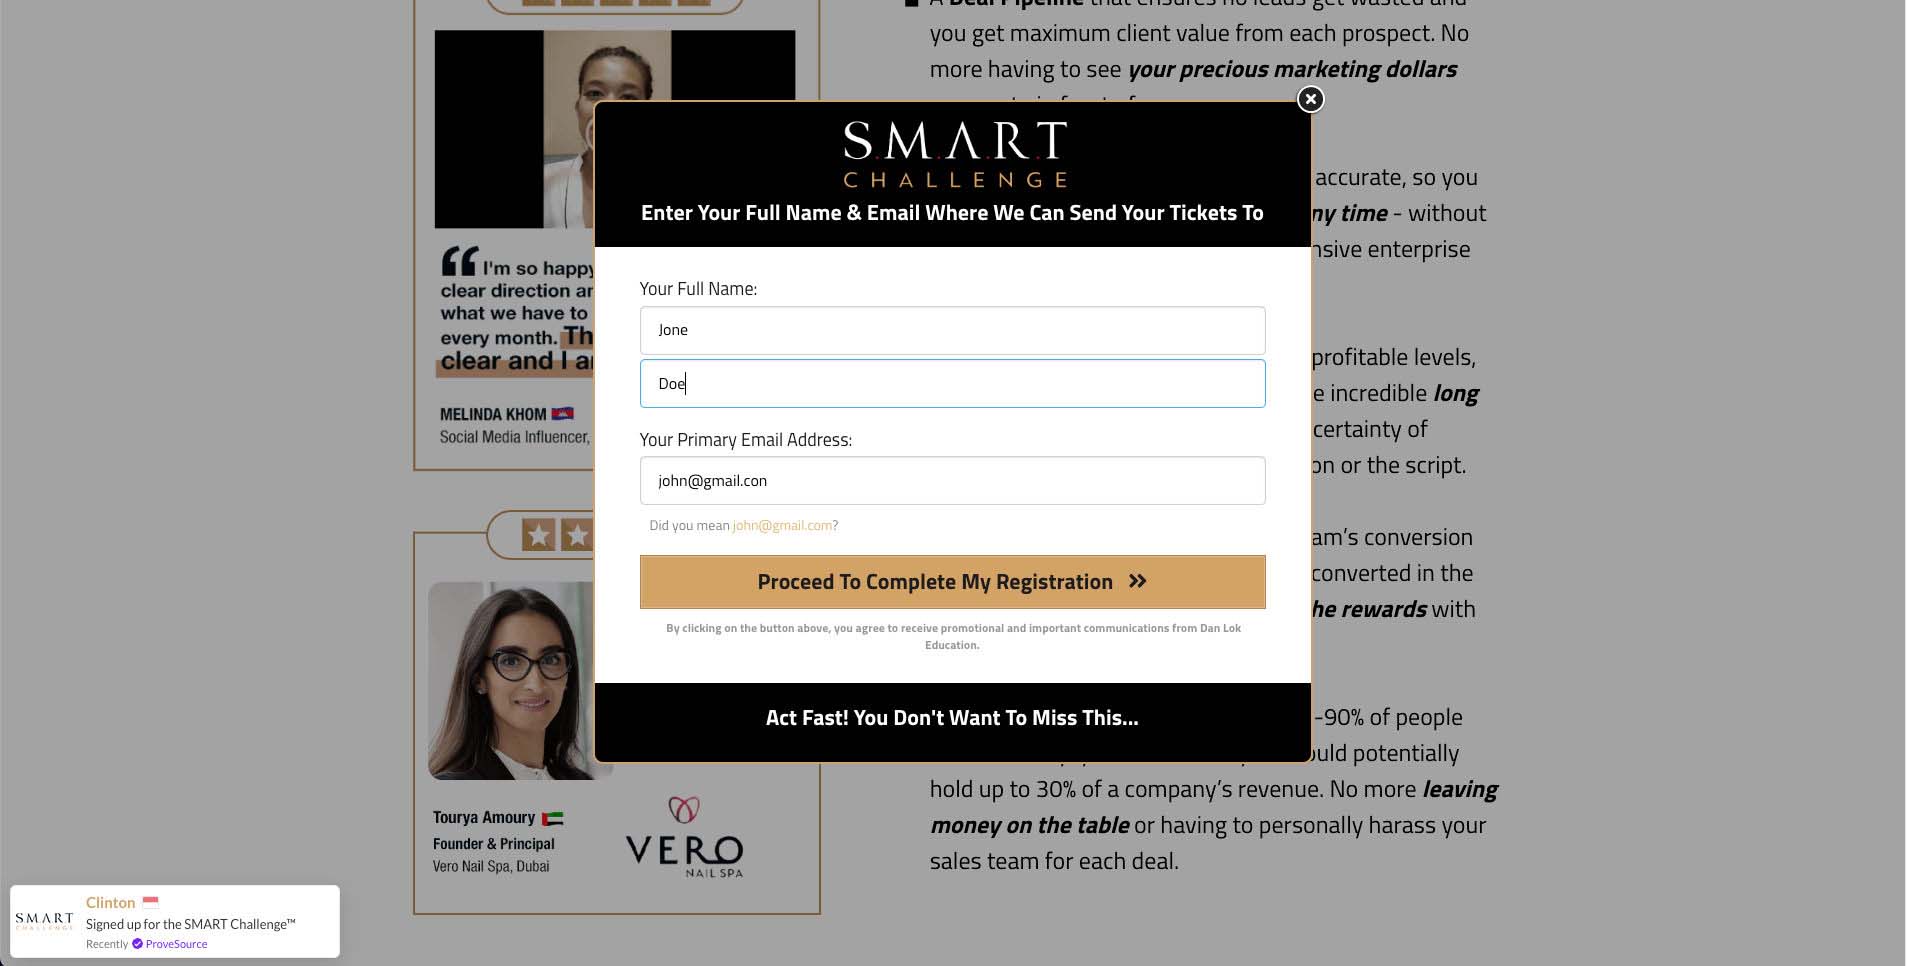 Example from SMART Challenge from Dan Lok Education. The validation shows the visitor input the wrong email format. This prevents further email failed delivery.